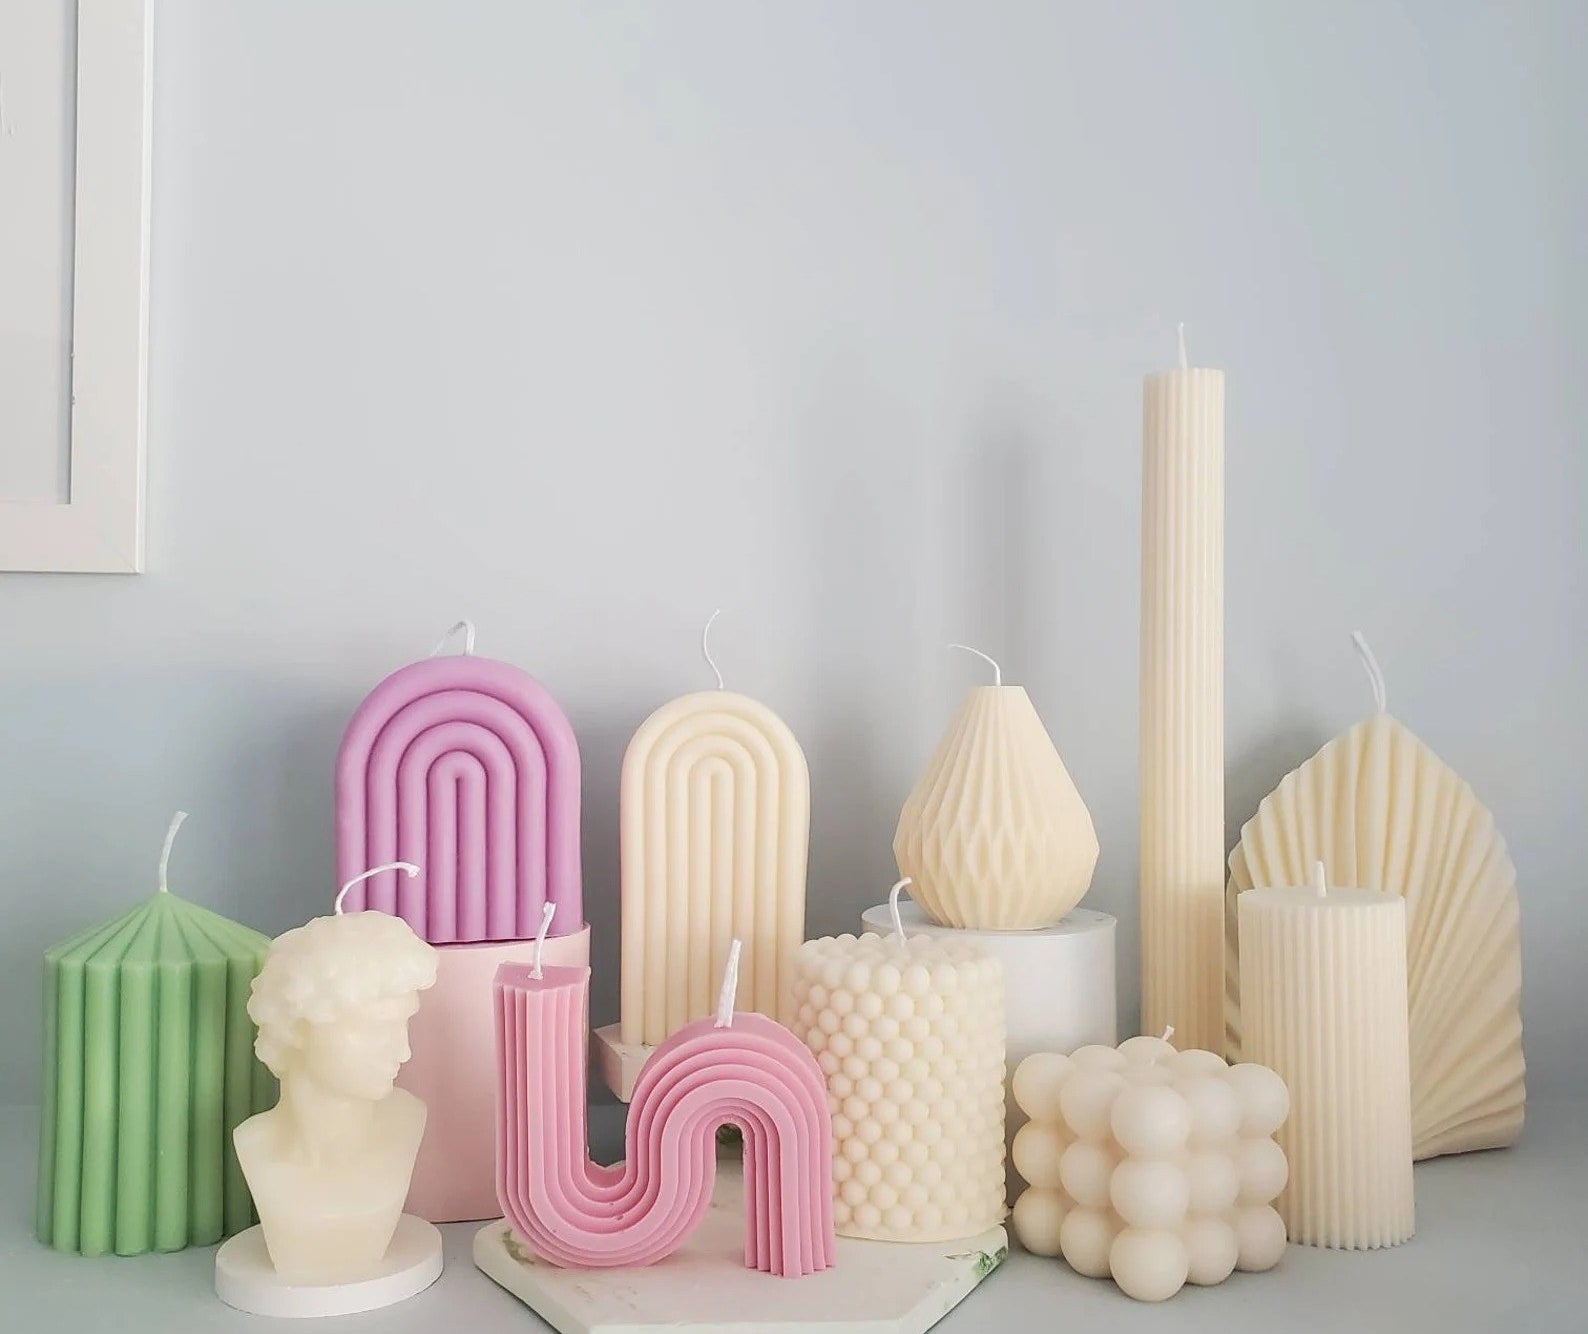 A variety of different shaped candles are shown